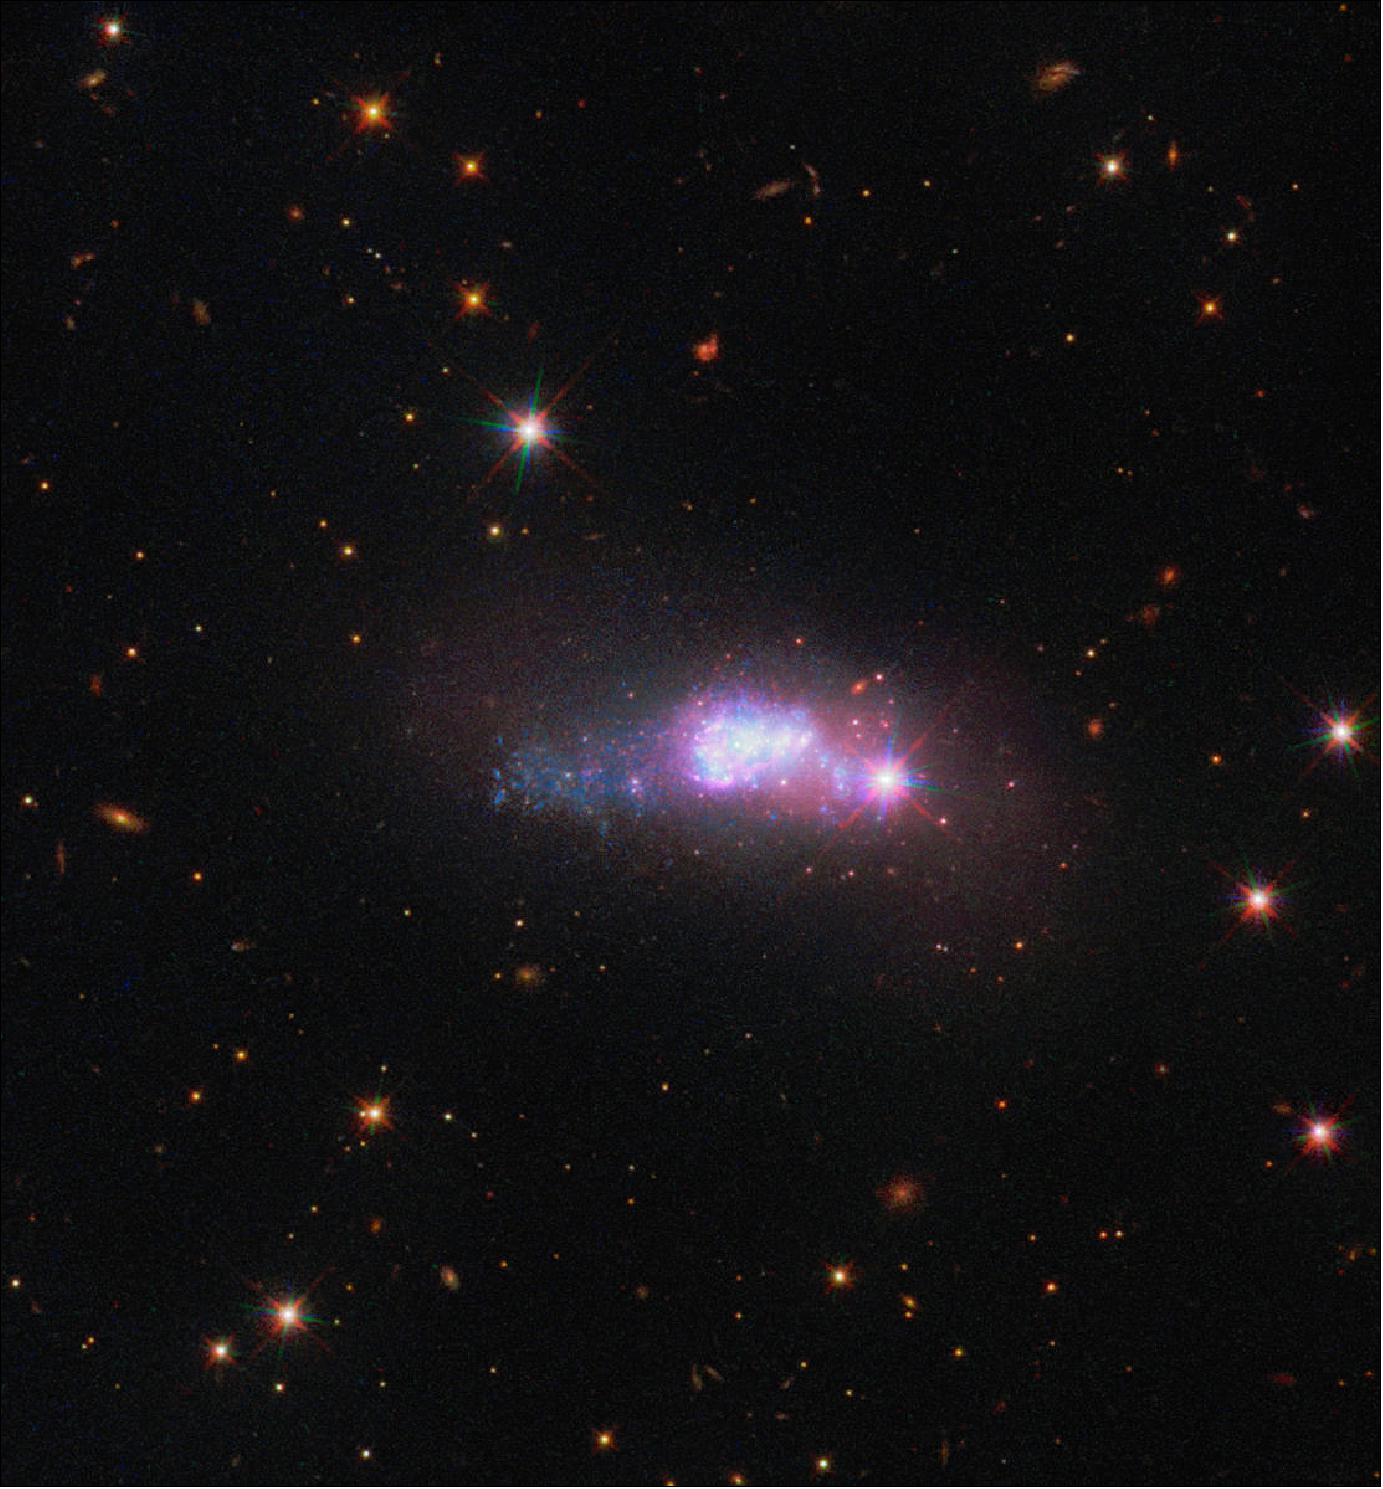 Figure 9: This captivating image from the NASA/ESA Hubble Space Telescope’s Wide Field Camera 3 shows a lonely dwarf galaxy, a staggering 100 million light-years away from Earth. This image depicts the blue compact dwarf galaxy ESO 338-4, which can be found in the constellation of Corona Australis (the Southern Crown), image credit: ESA/Hubble & NASA